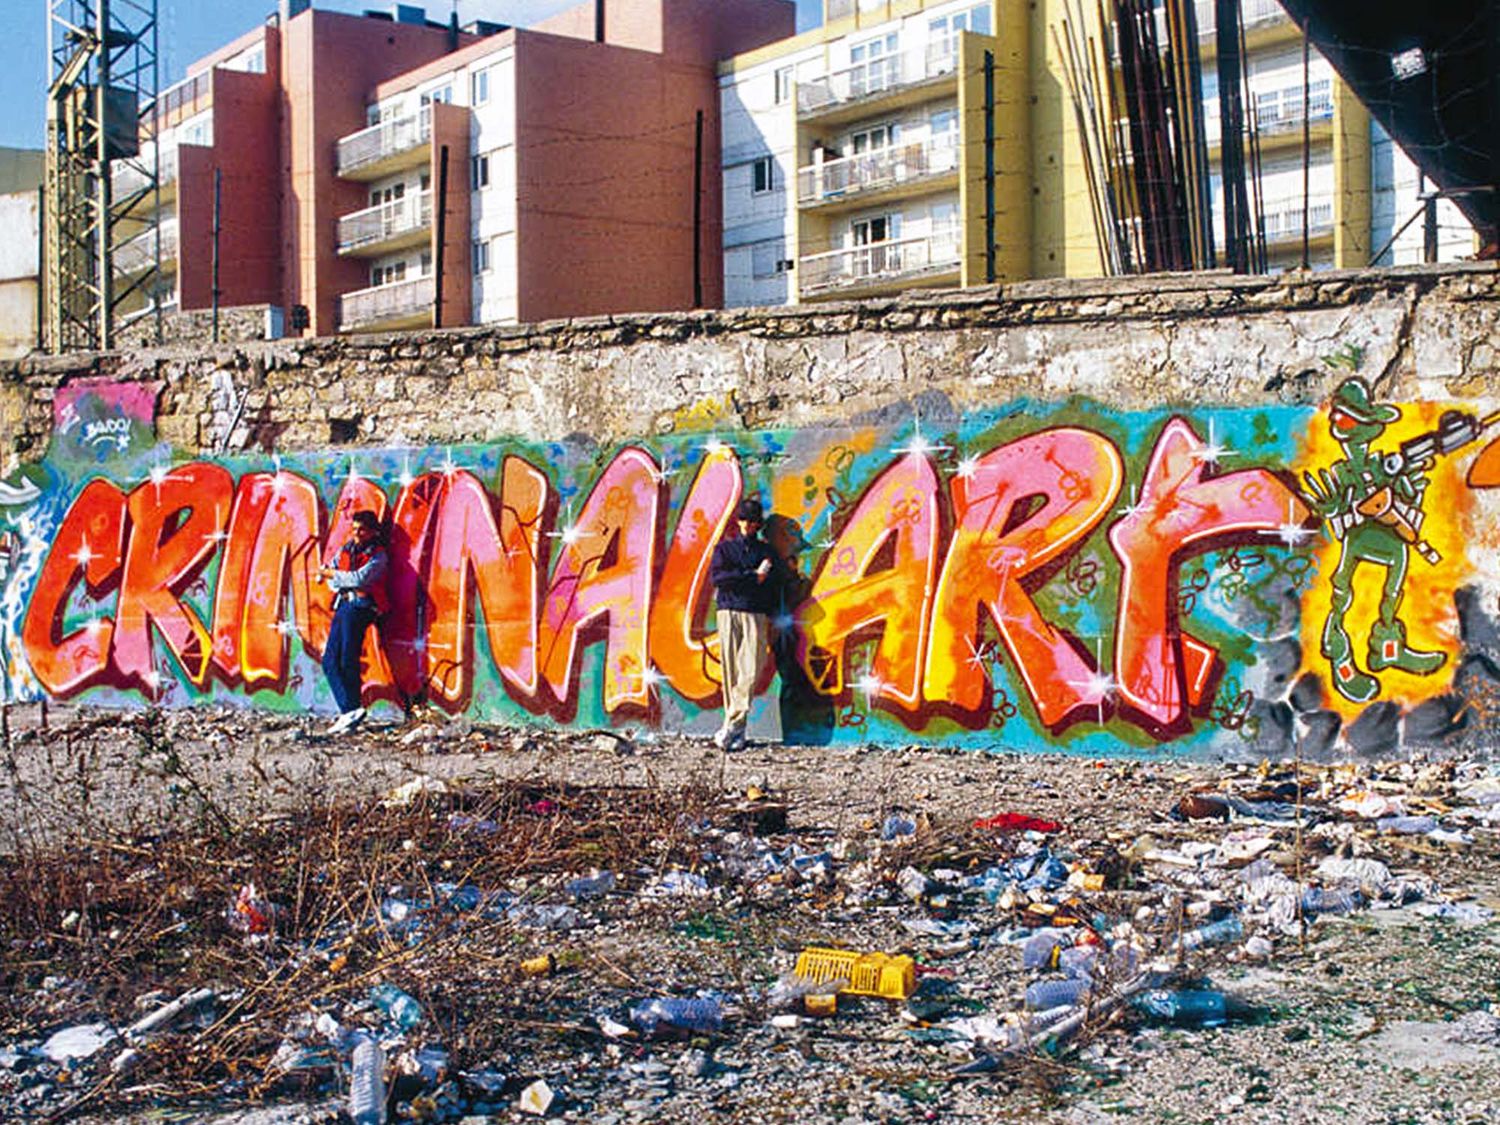 Done at the end of the eighties by Bando and Mode2, “Criminal Art” is probably the most iconic graffiti mural from the era of the wasteland of Stalingrad-La Chapelle in Paris (©Claude Abron).